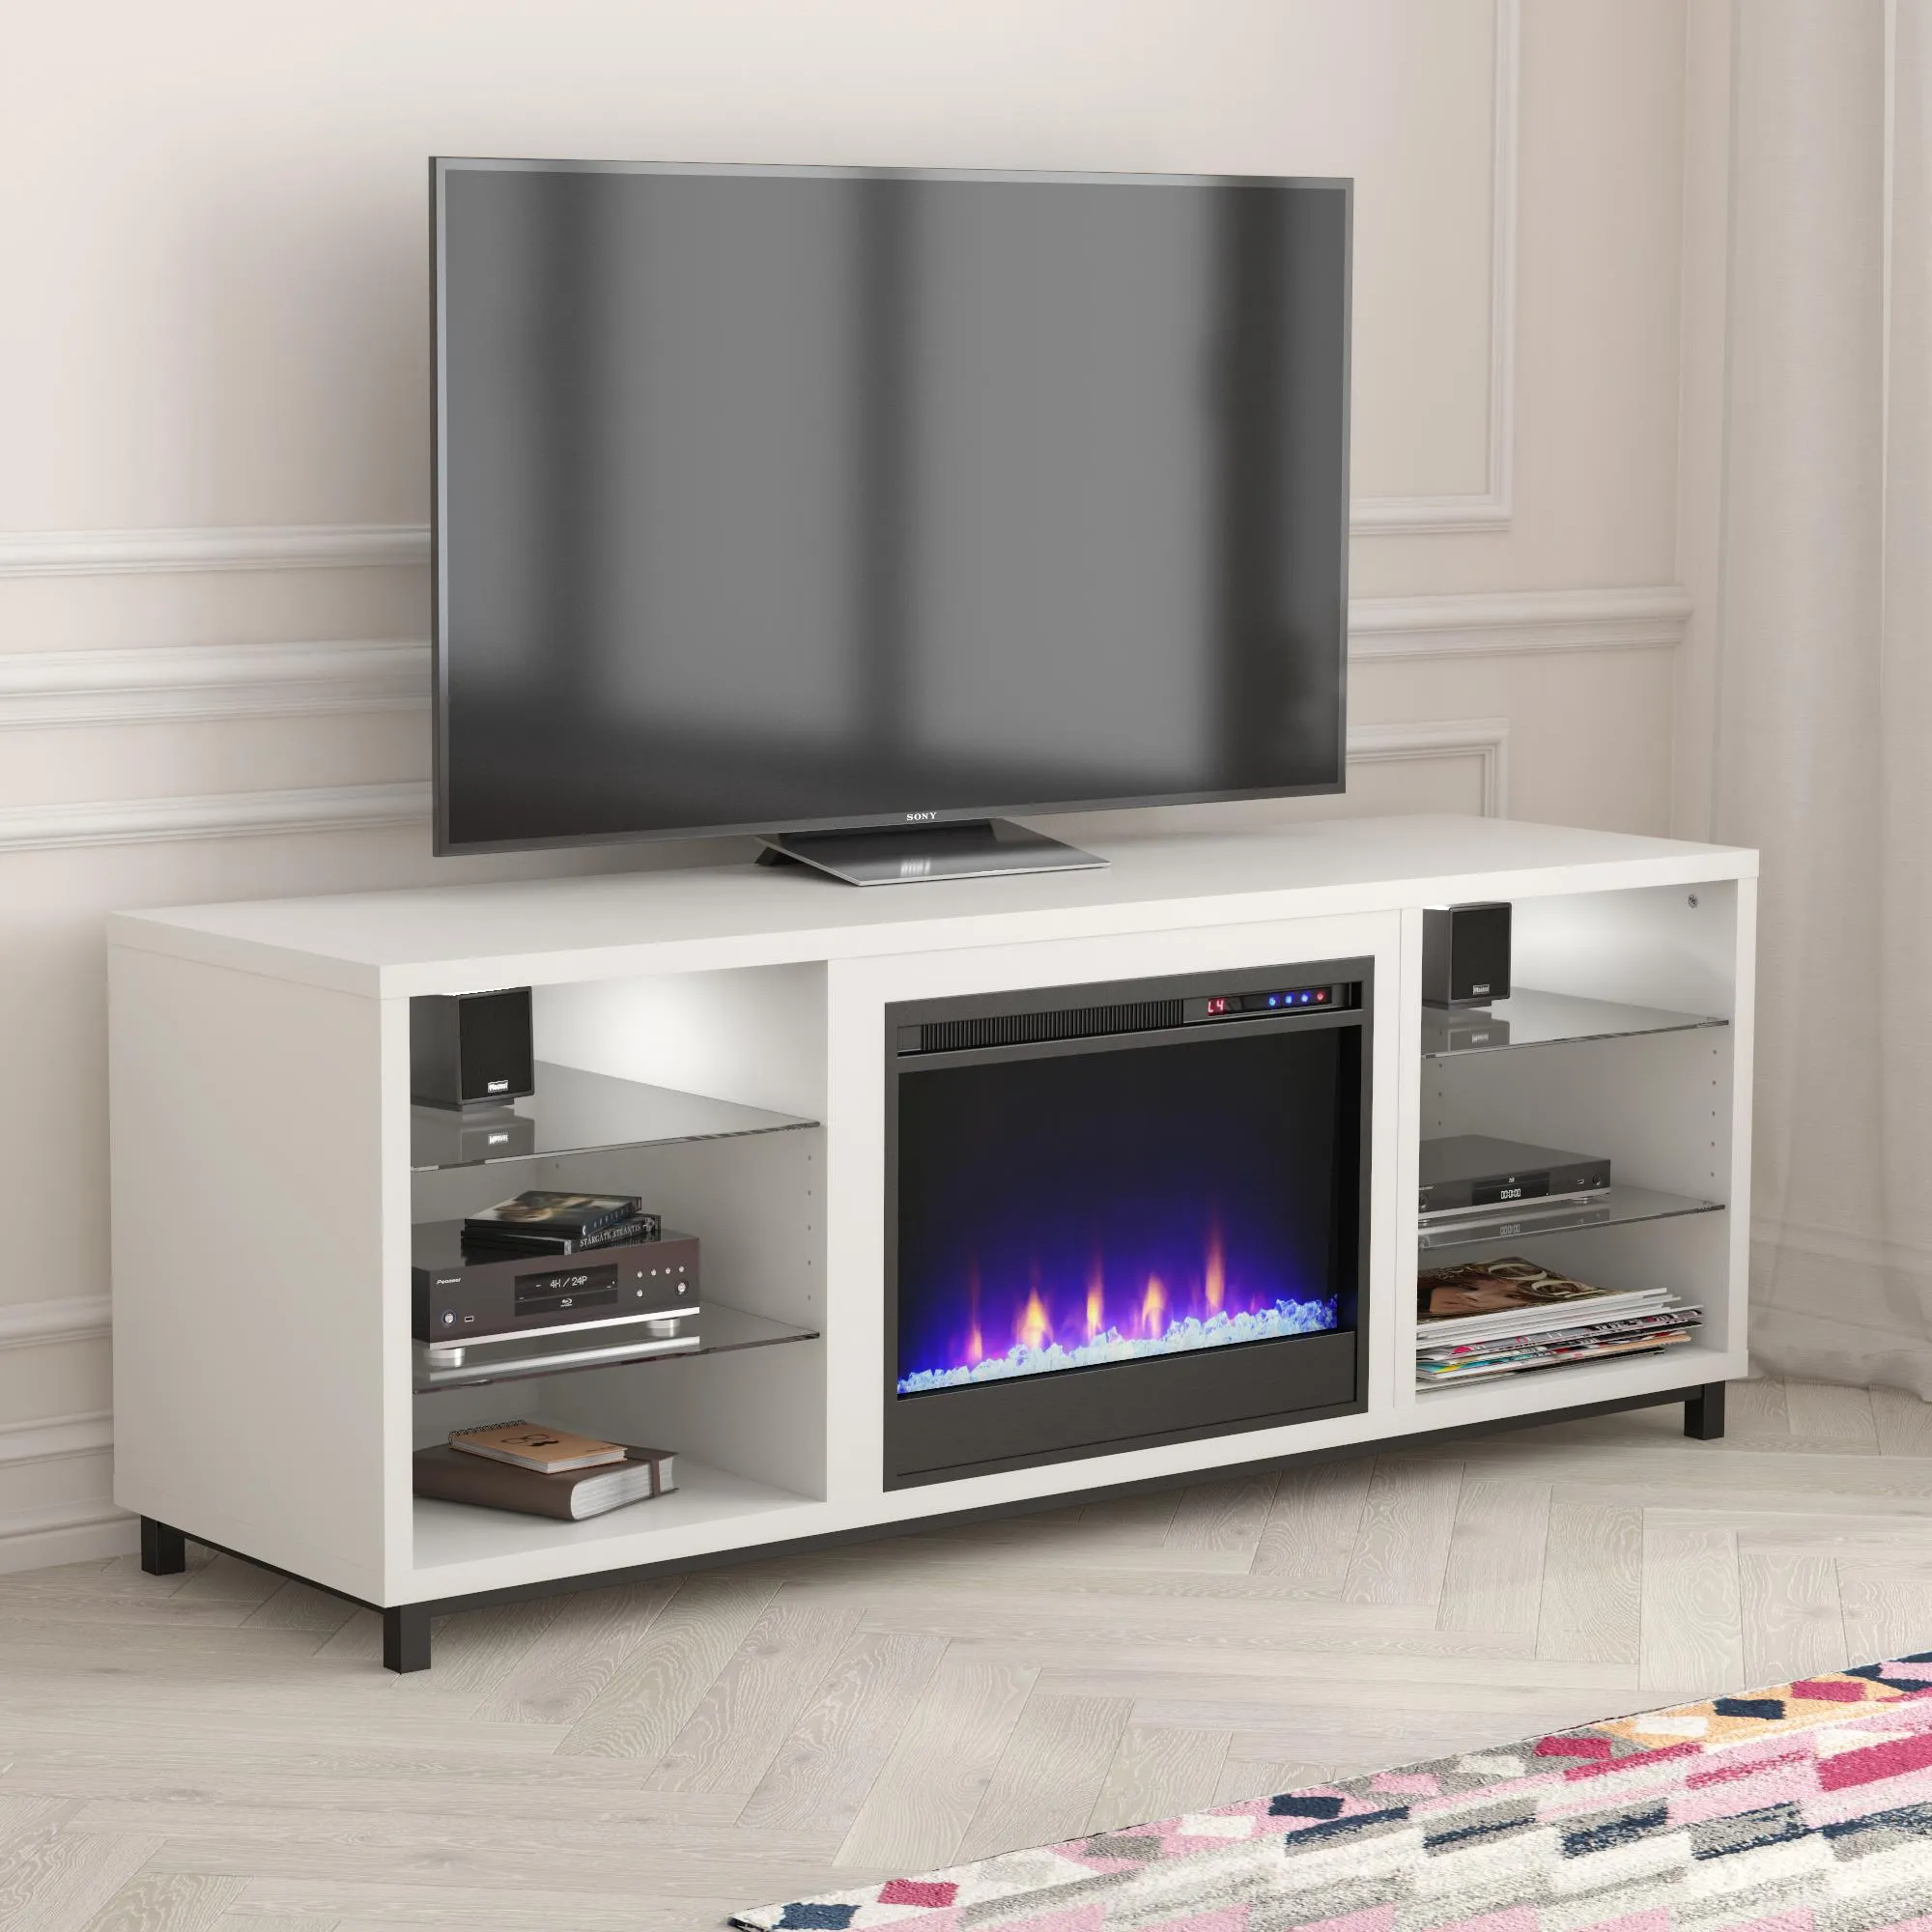 CosmoLiving by Cosmopolitan Westchester Fireplace TV Stand for TVs up to 65"